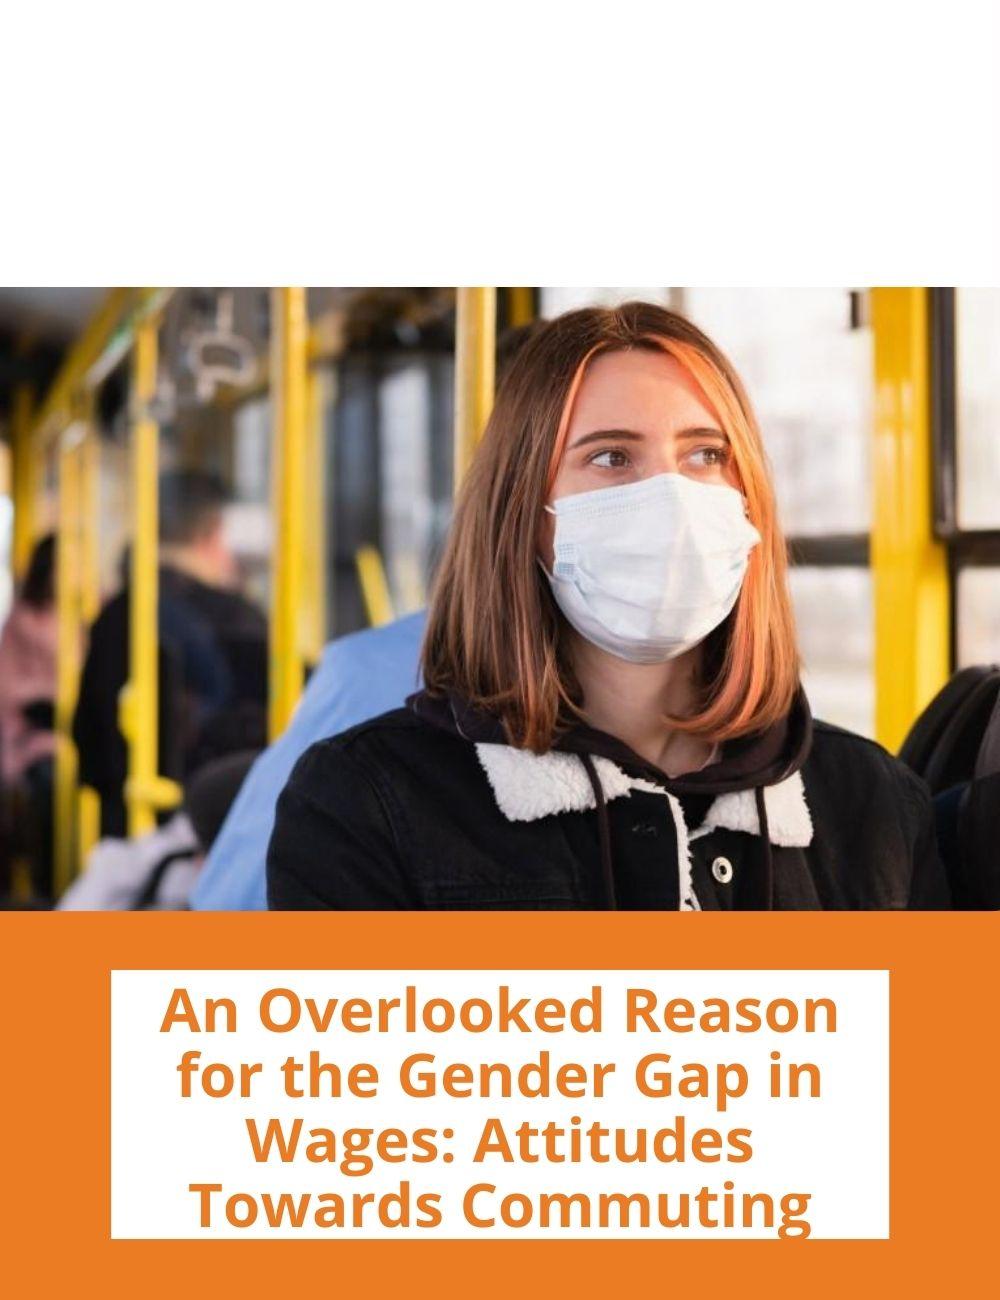 Image: a girl wearing a surgical mask sitting on a bus. Link to related stories. Story headline: An Overlooked Reason for the Gender Gap in Wages: Attitudes Towards Commuting